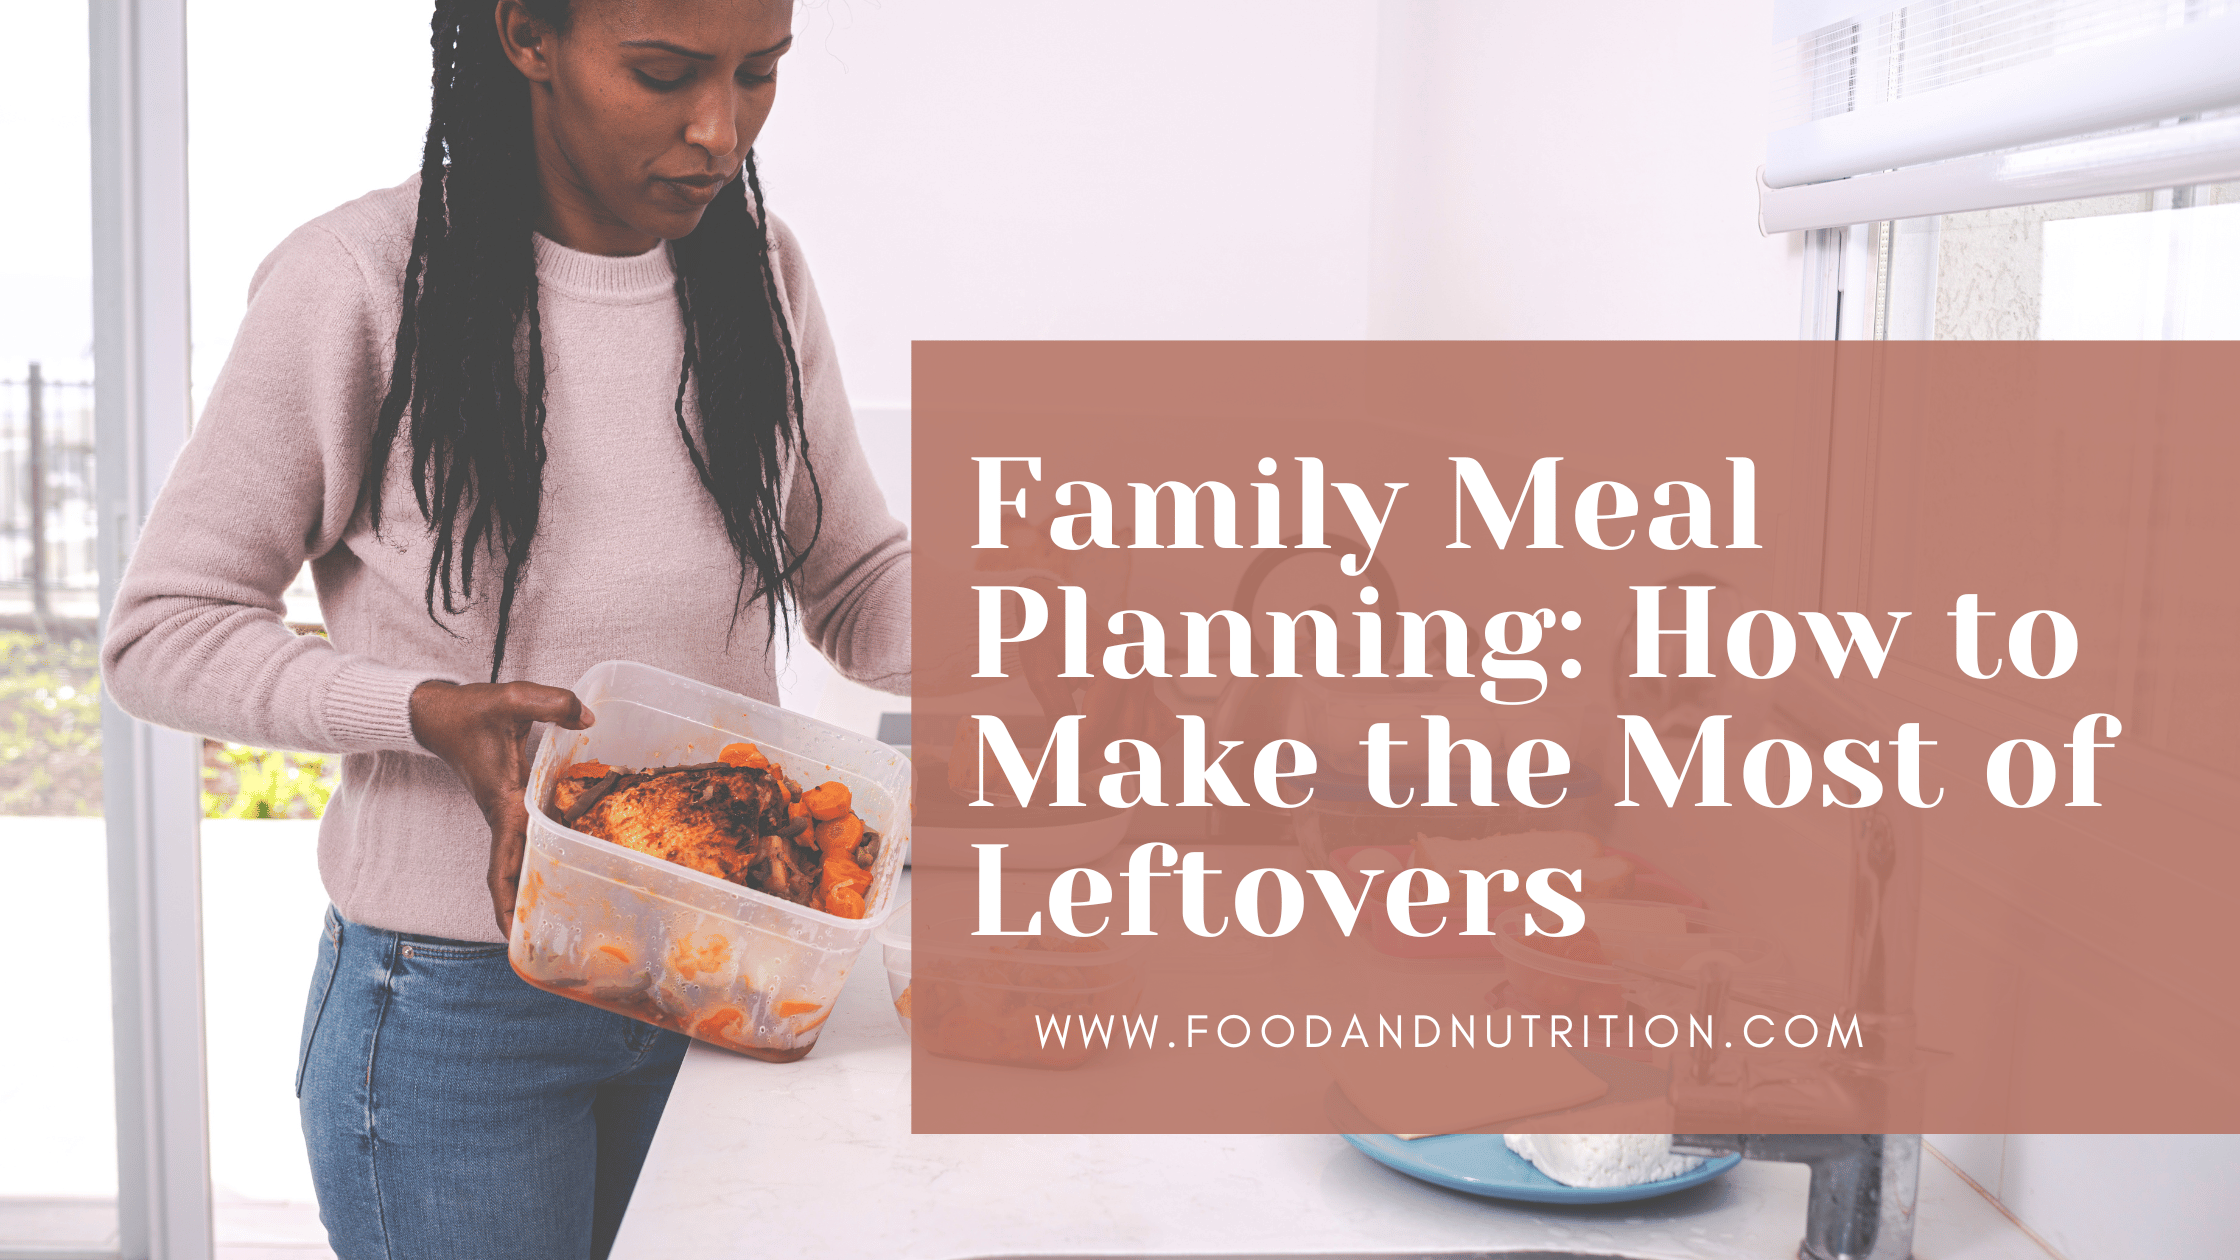 Family Meal Planning: How to Make the Most of Leftovers